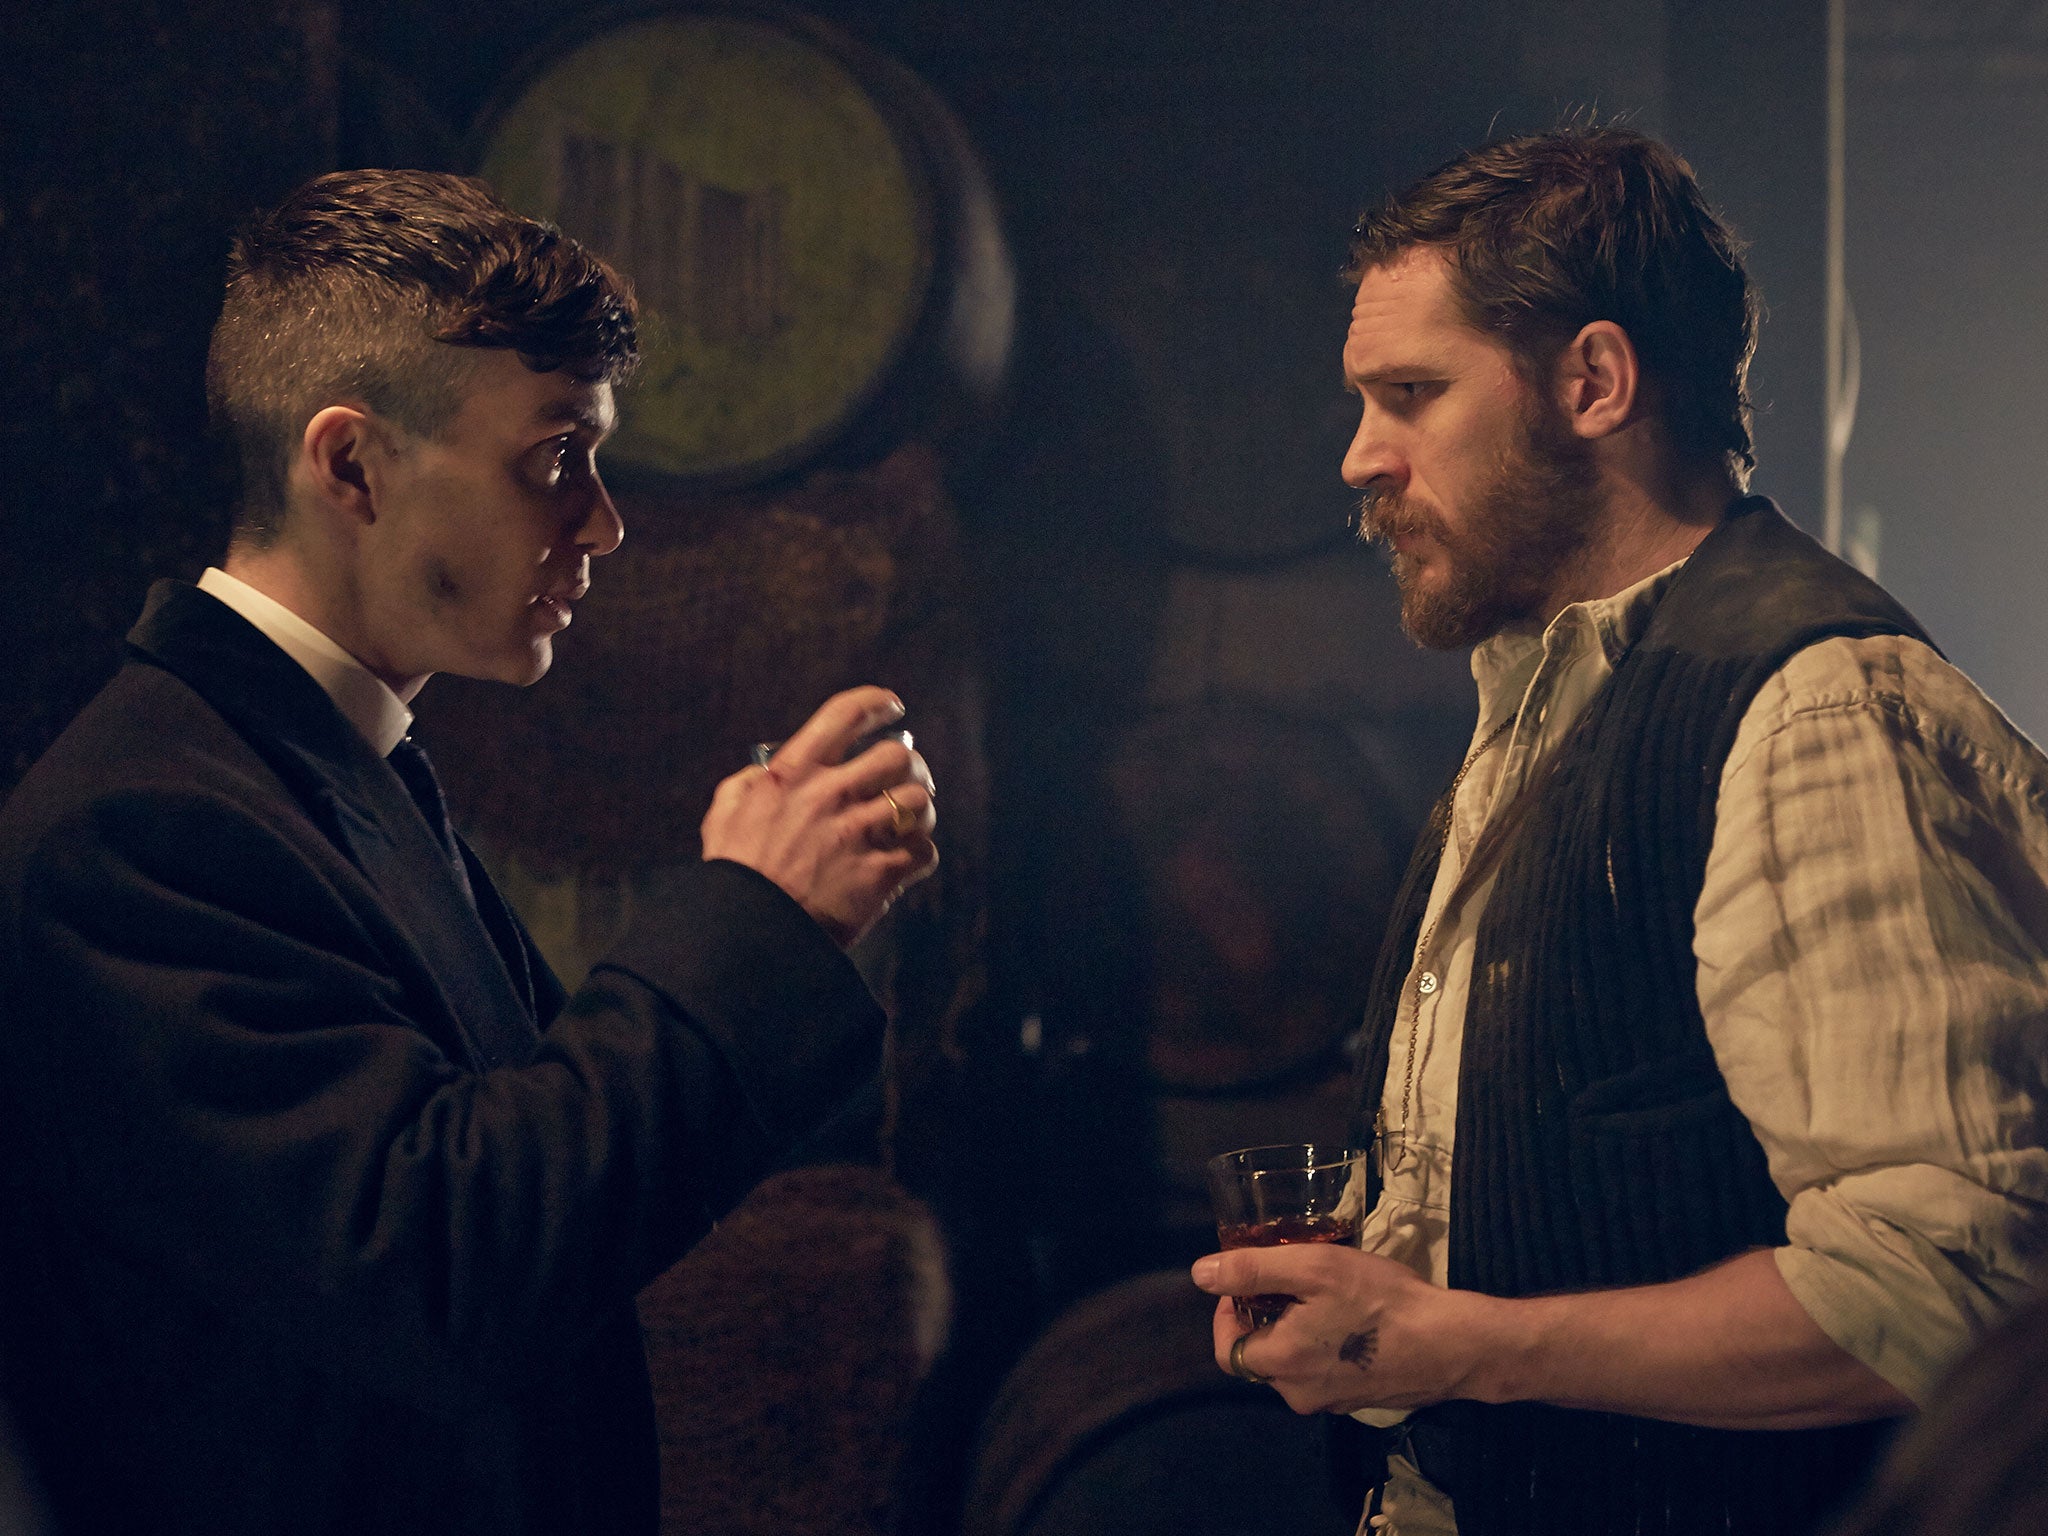 Cillian Murphy (left) and Tom Hardy in 'Peaky Blinders'